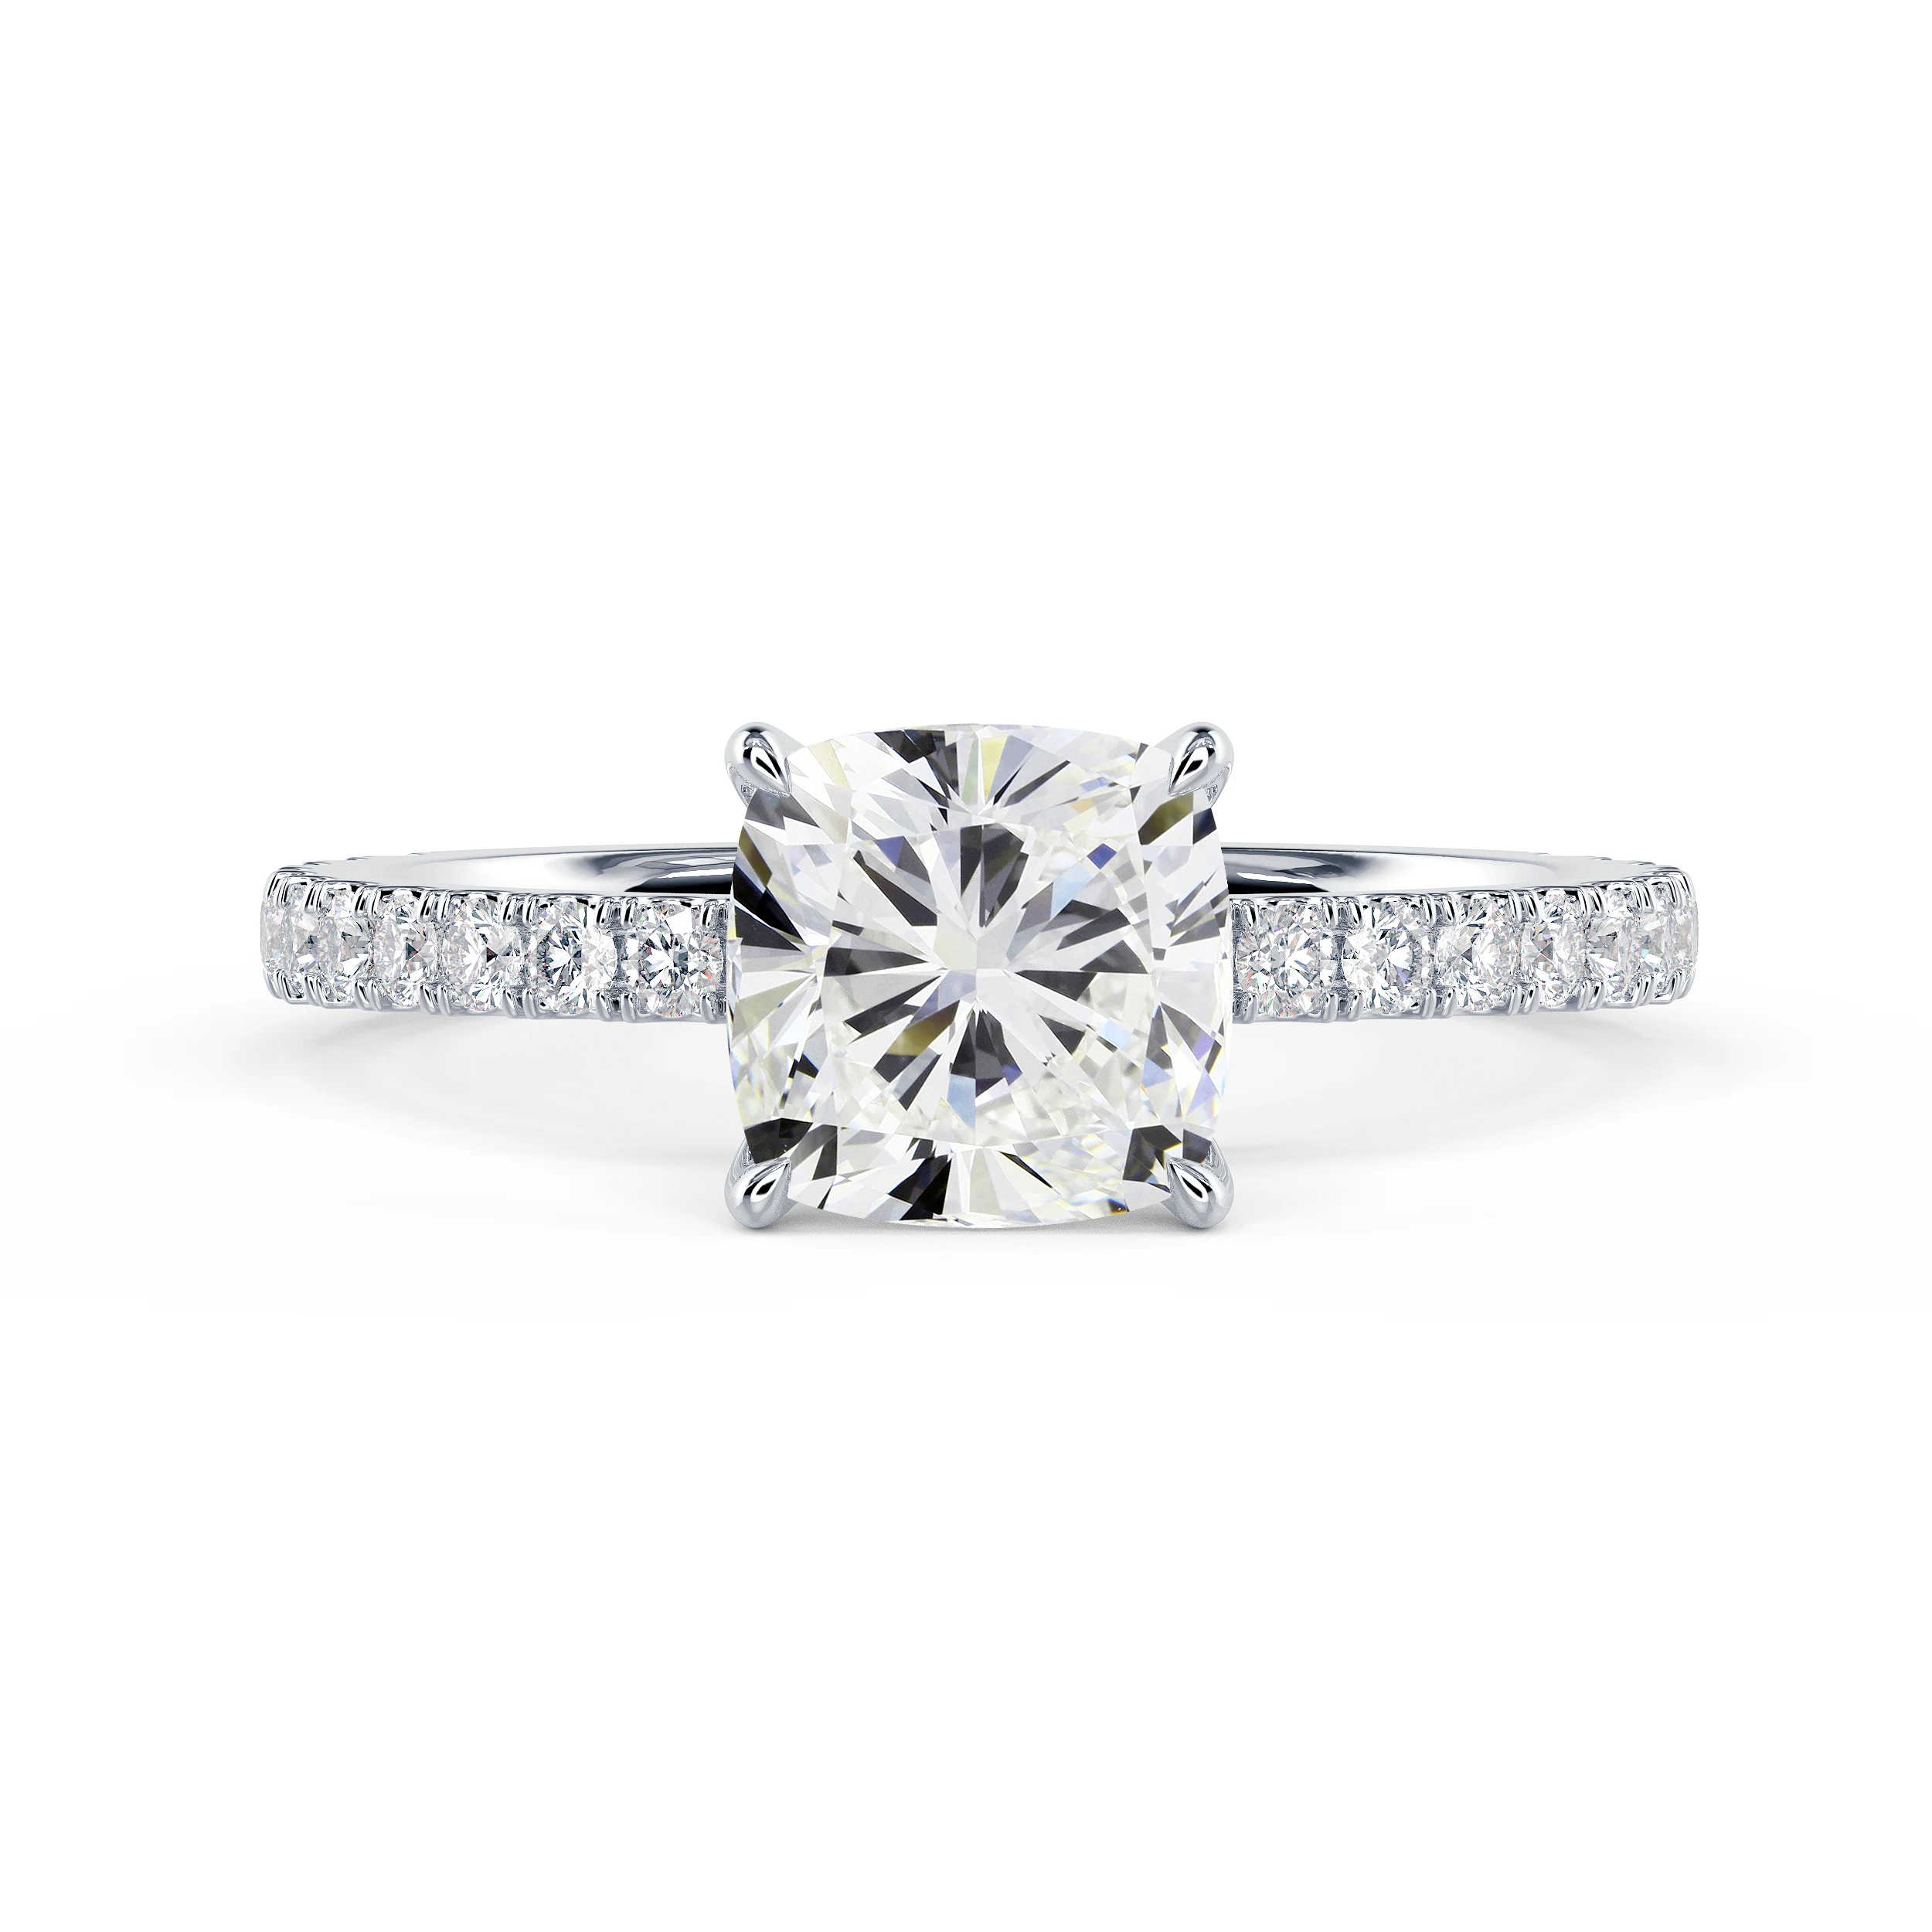 Exceptional Quality Lab Diamonds Cushion Classic Four Prong Pavé Diamond Engagement Ring in White Gold (Main View)